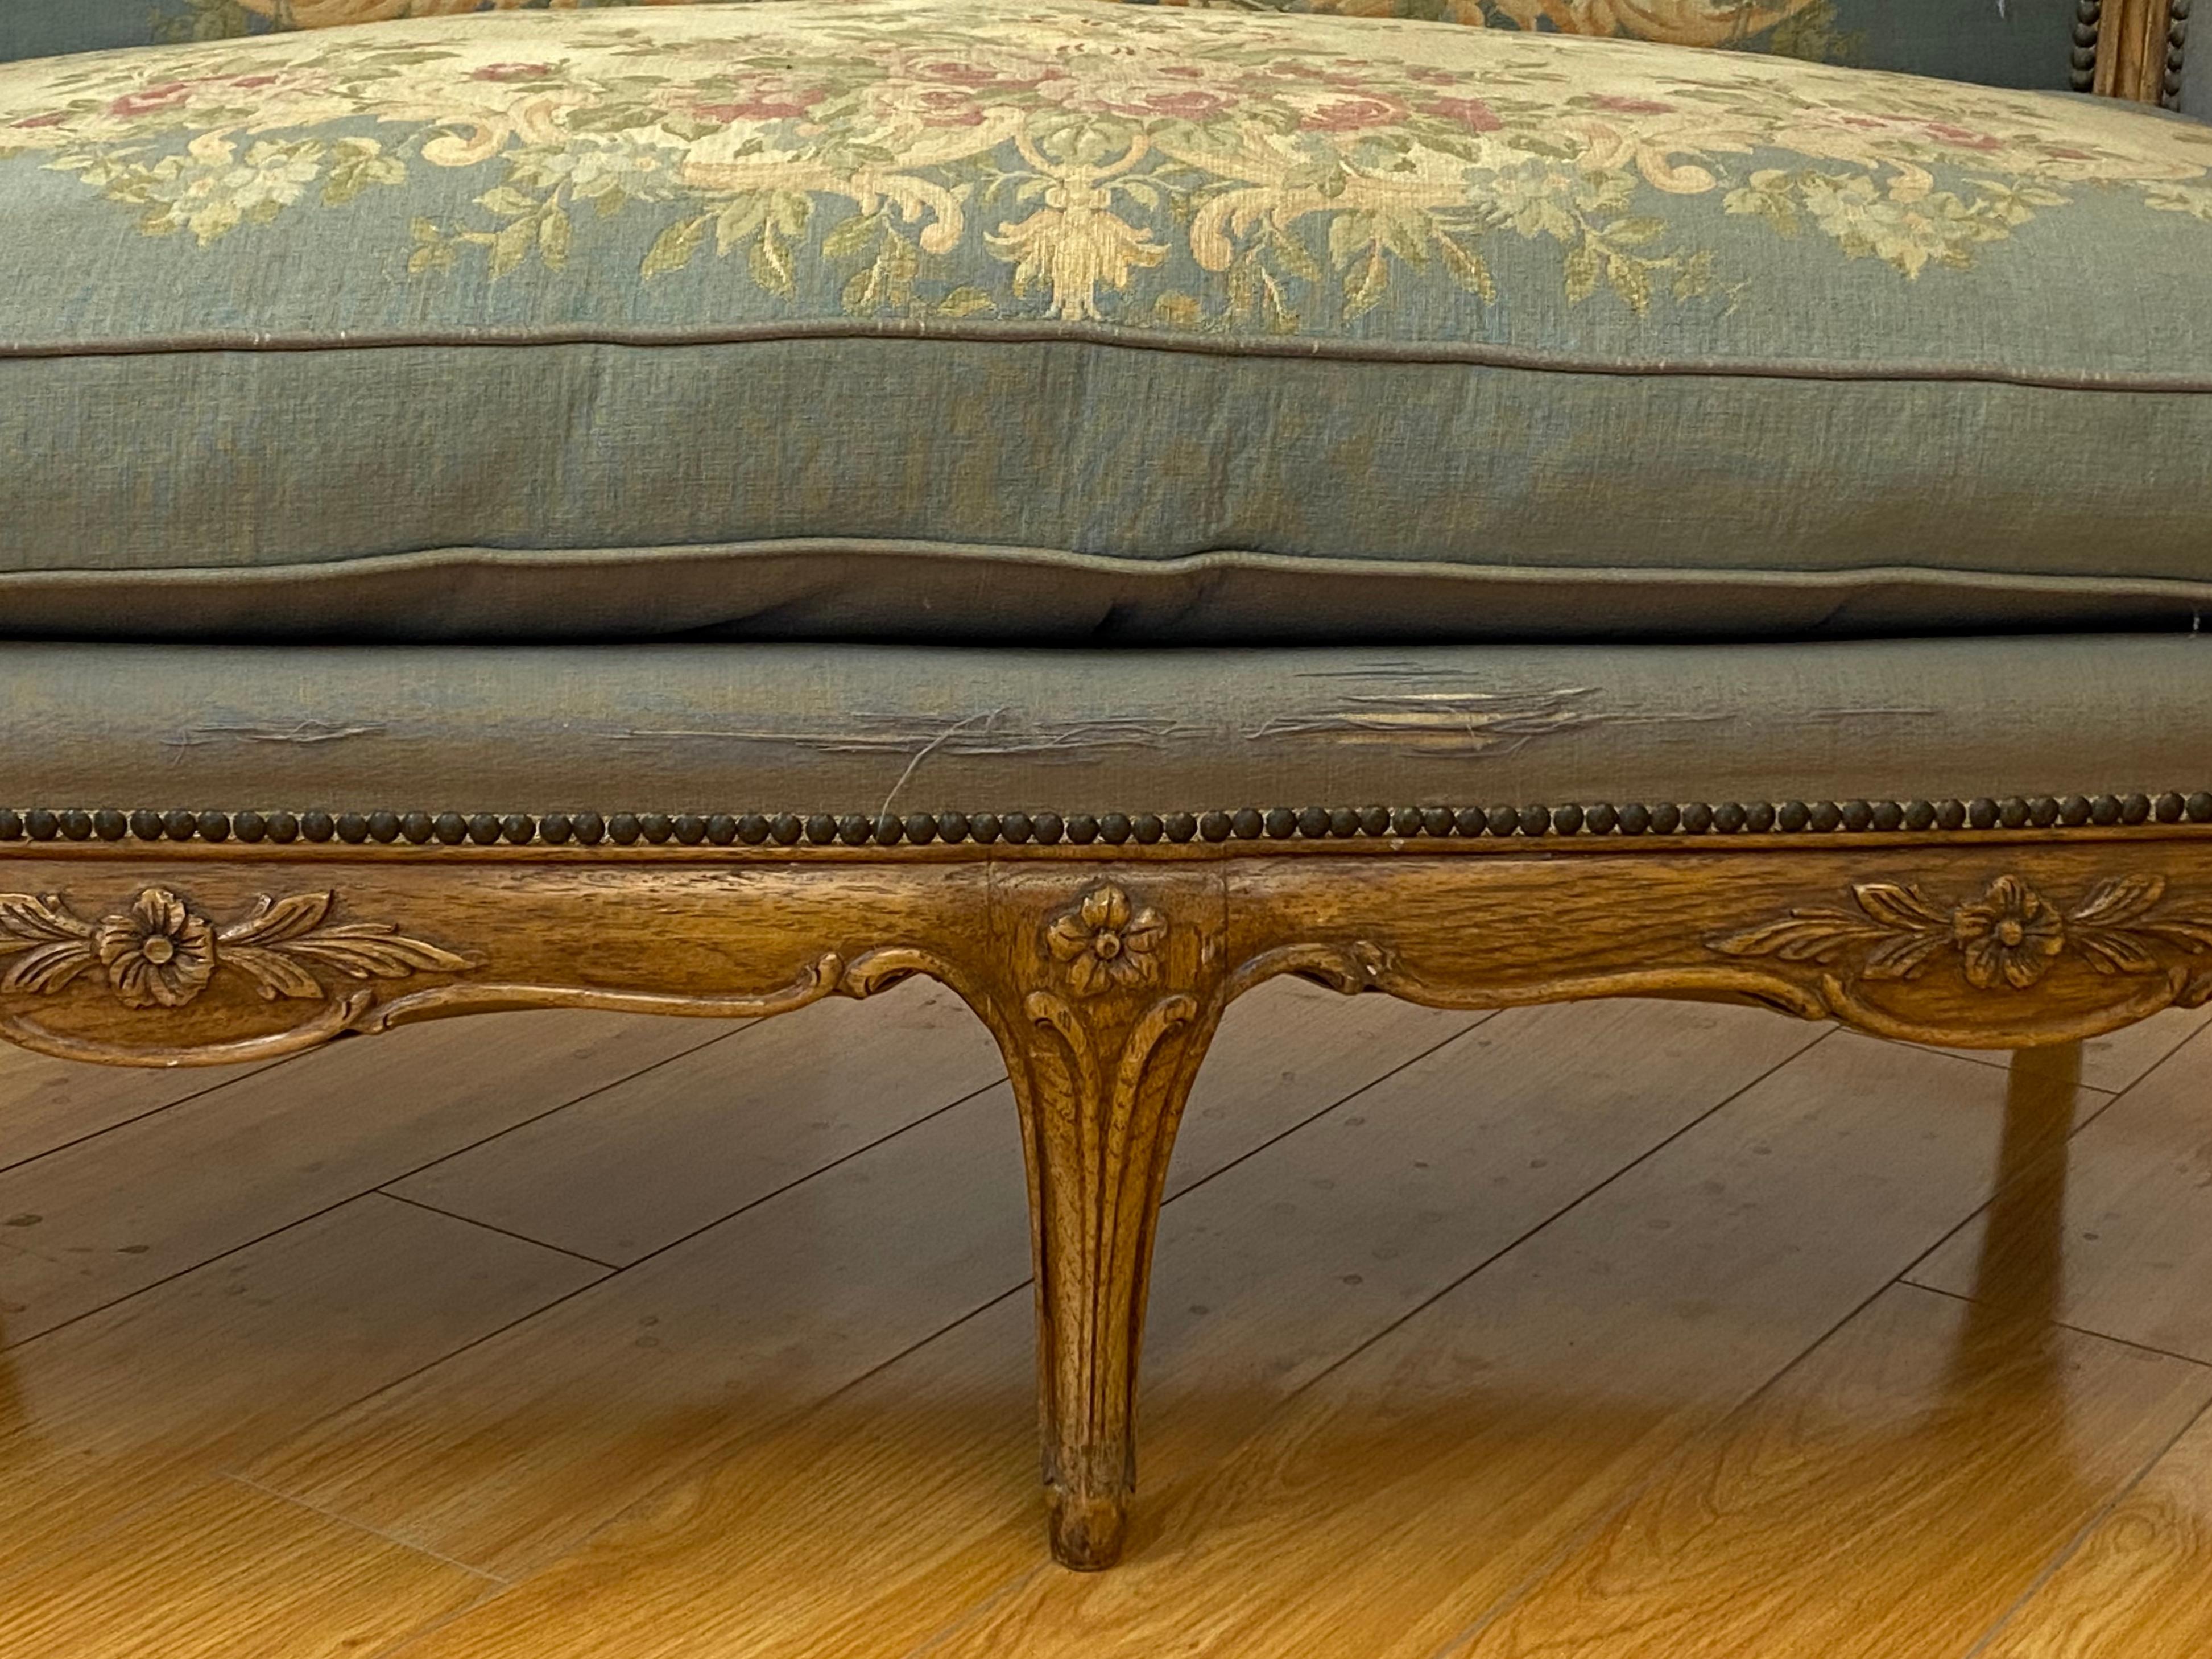 1920s American carved oak settee by Robert Irwin, Grand Rapids, MI

Gorgeous early 20th century hand carved oak settee by noted furniture maker Robert Irwin

The settee is covered with a cotton floral design tapestry upholstery and is filled